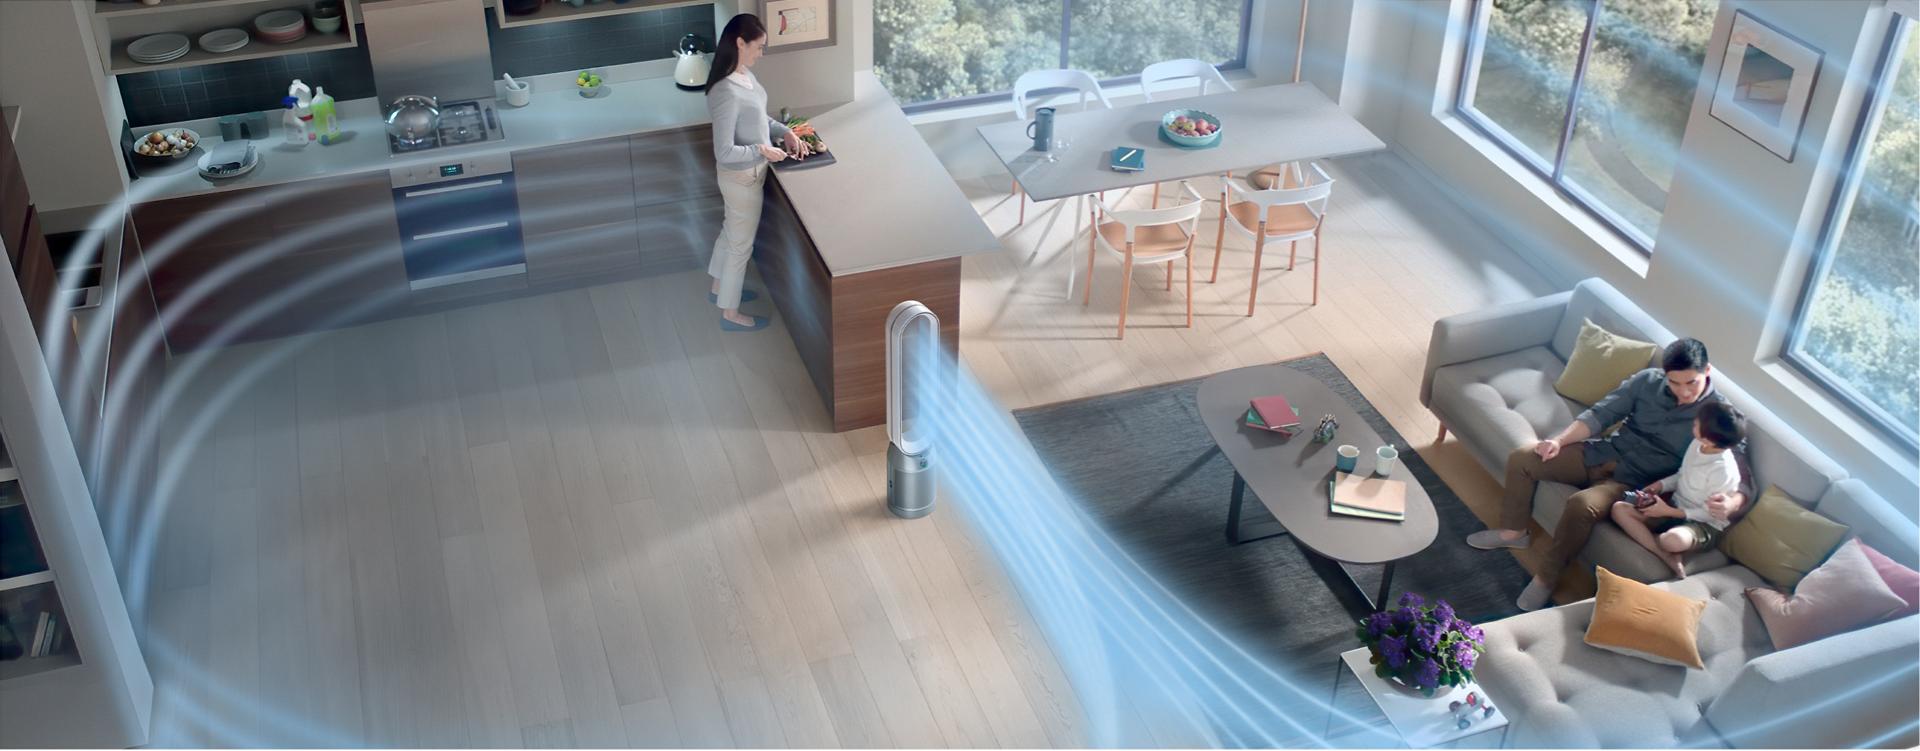 Dyson purifier cool formaldehyde purifying a large living space